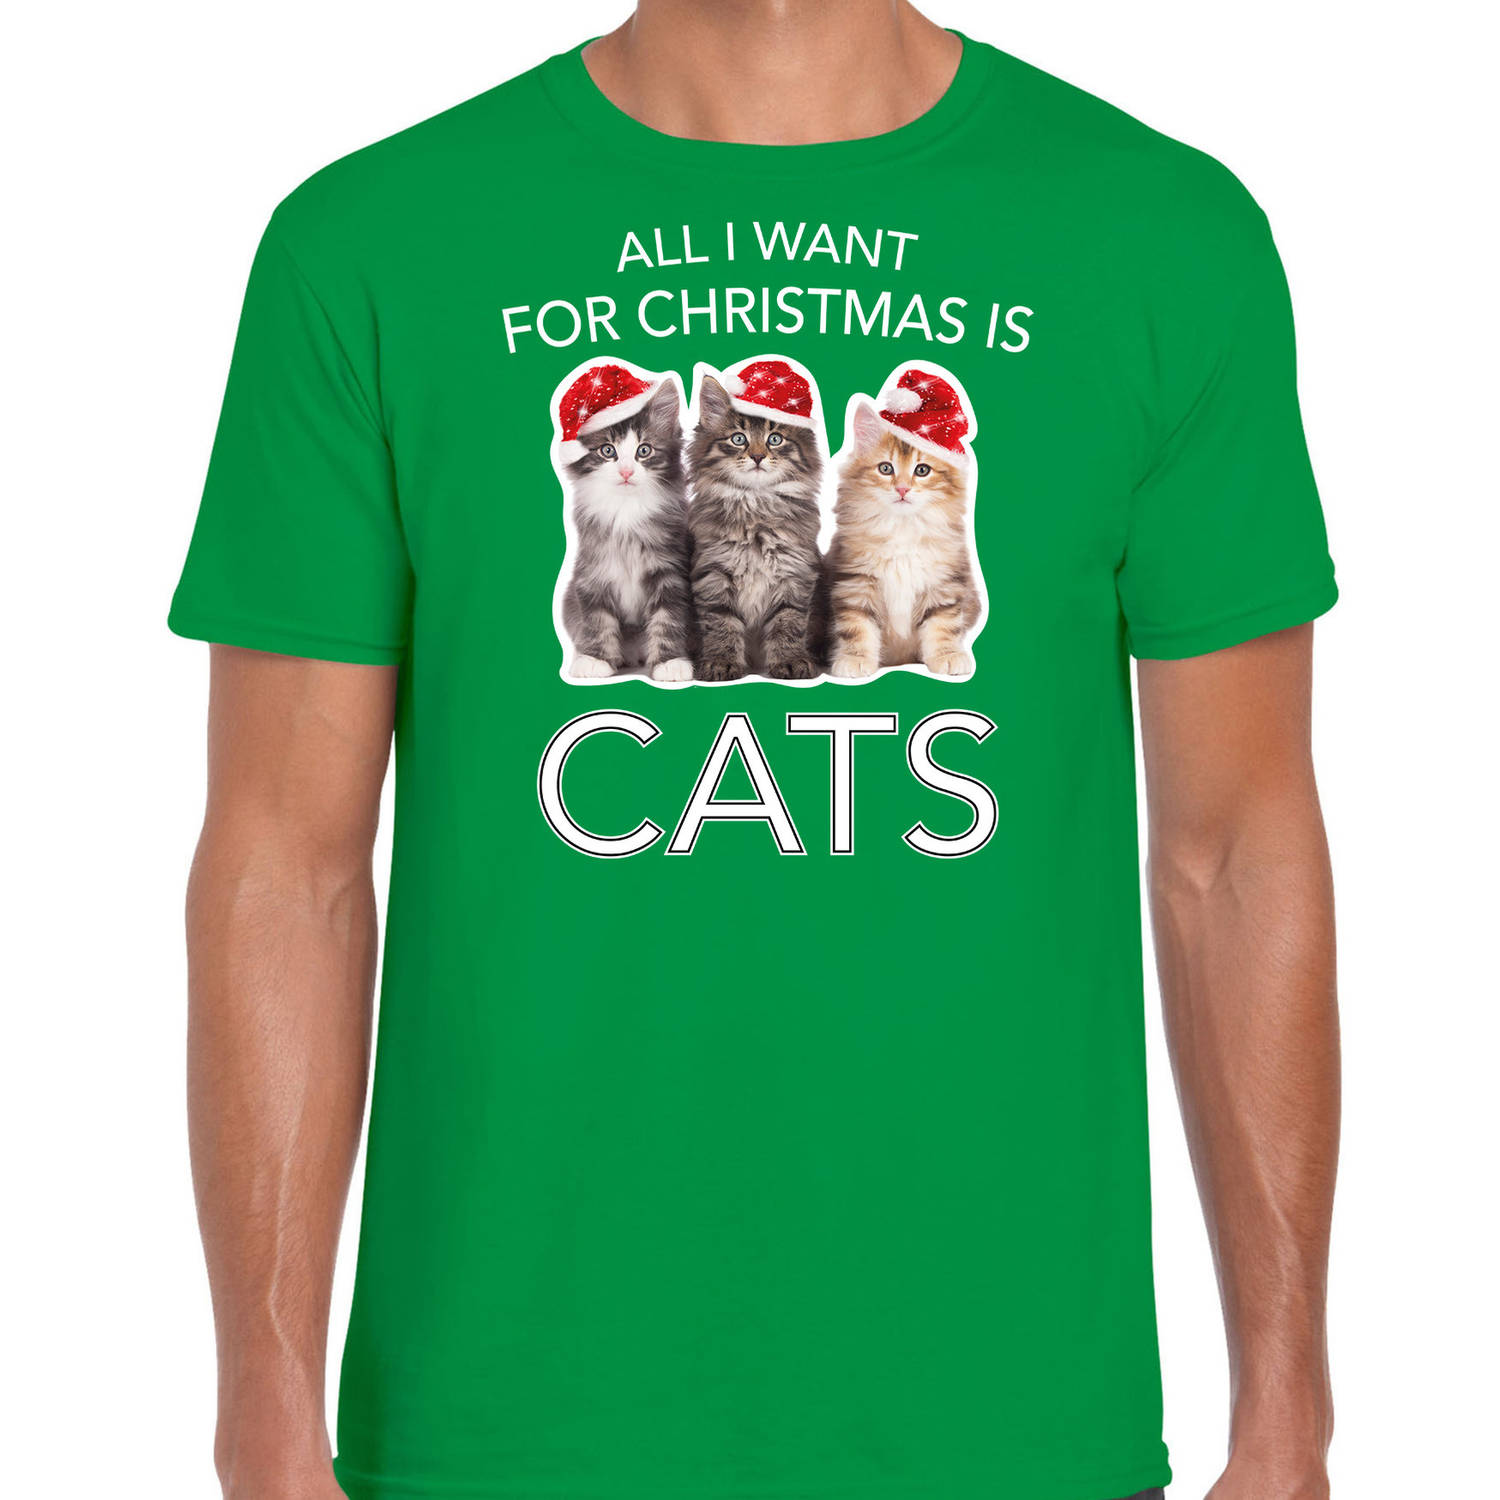 Groen Kerst shirt/ Kerstkleding All i want for Christmas is cats voor heren L - kerst t-shirts